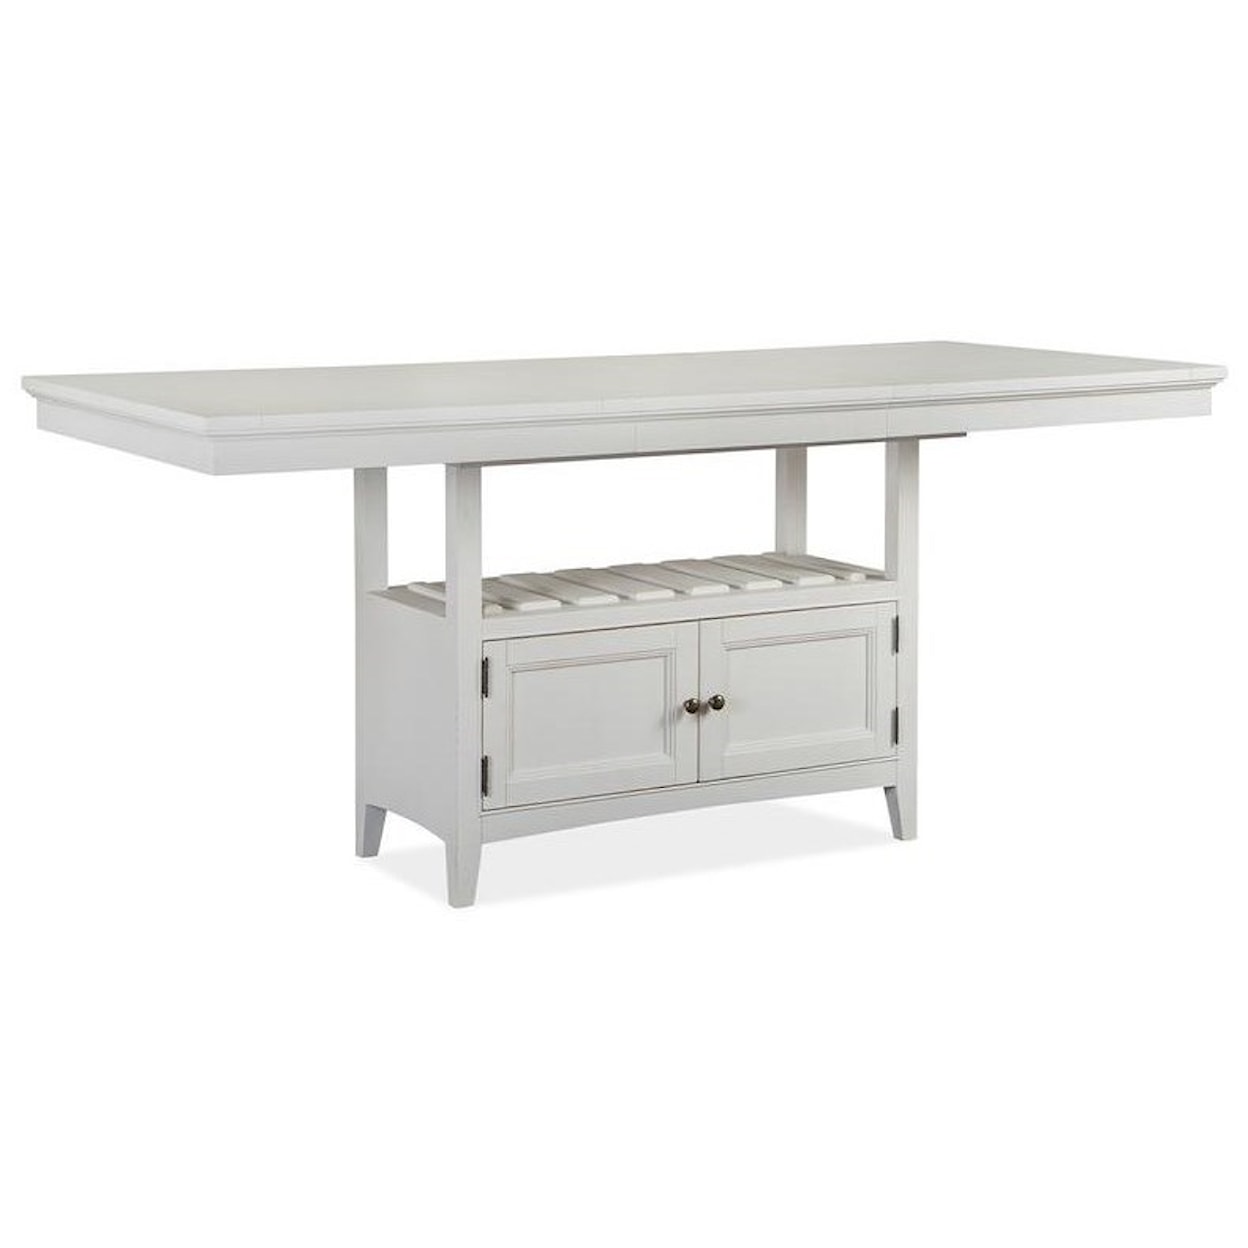 Magnussen Home Westley Falls Dining Counter Table